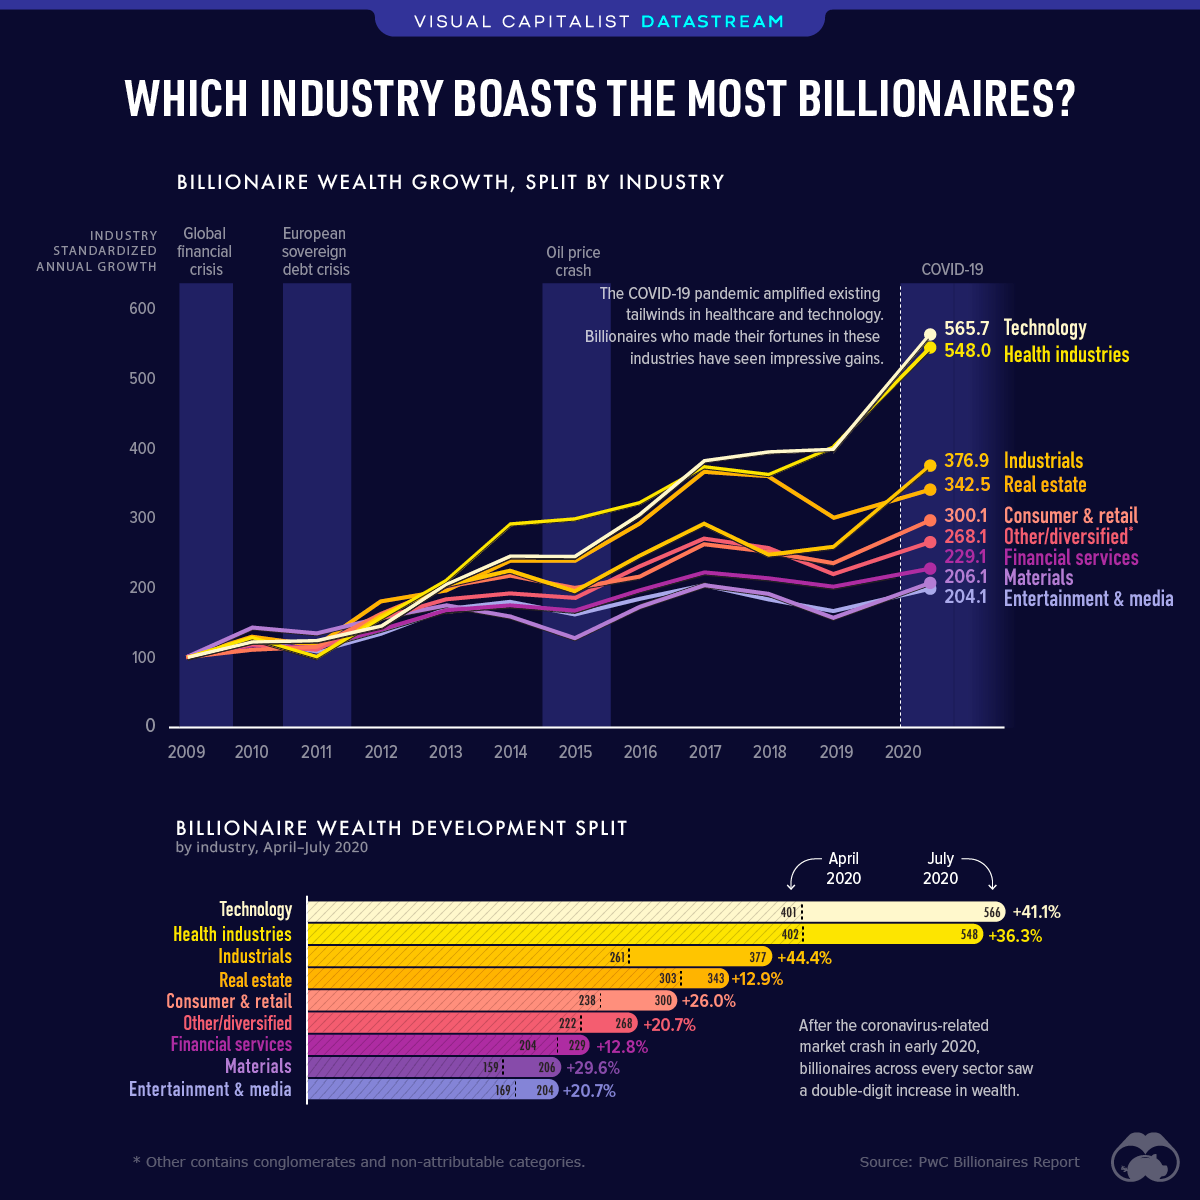 which industry boasts the most billionaire wealth